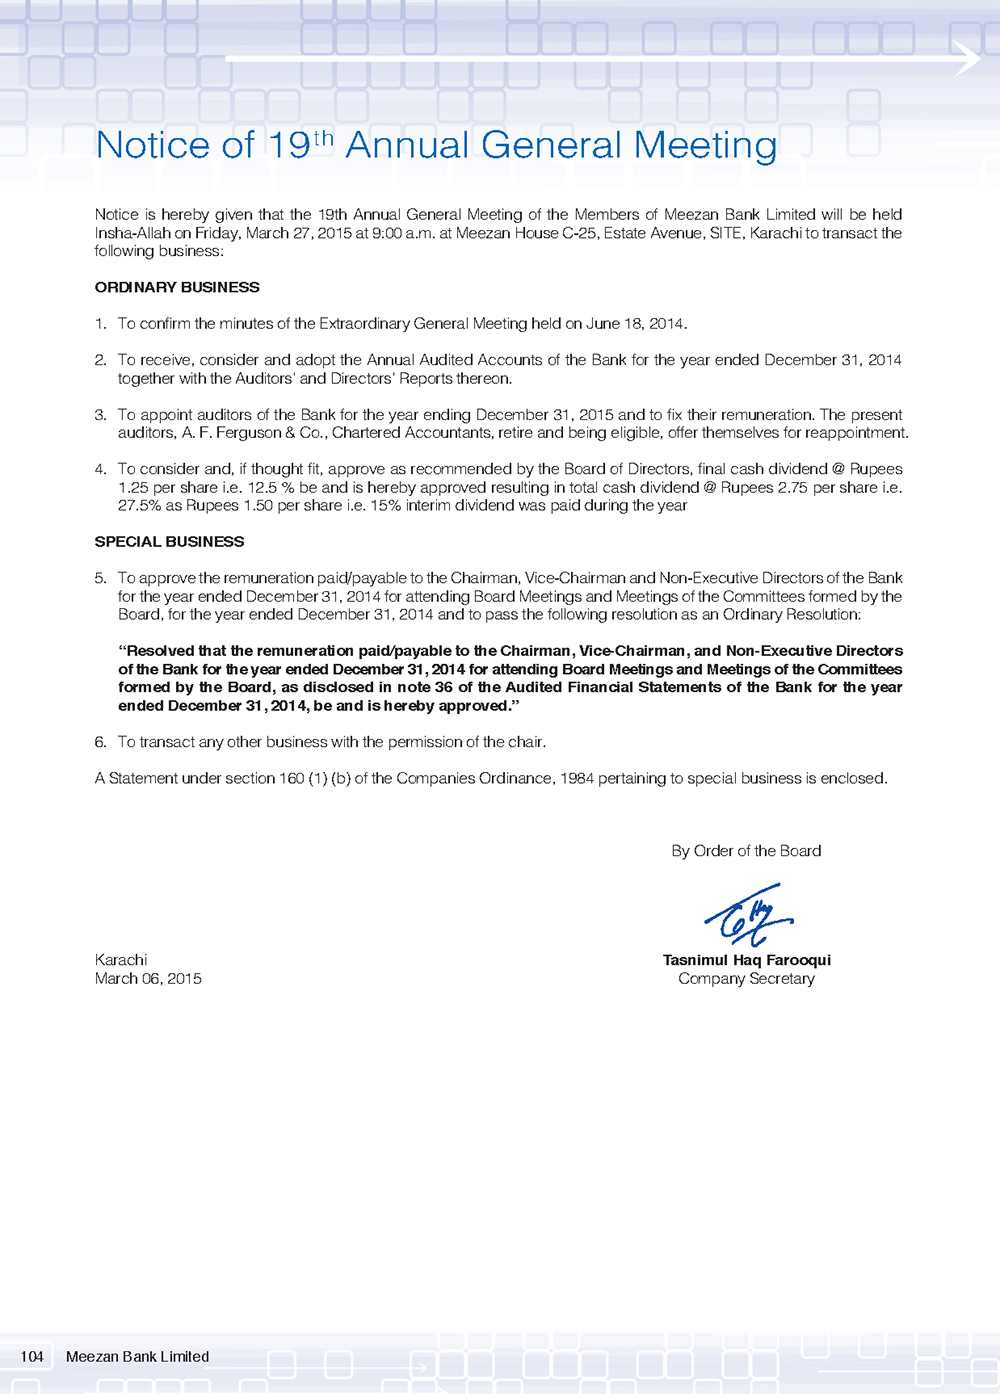 Notice of 19th Annual General Meeting 2015 (3)